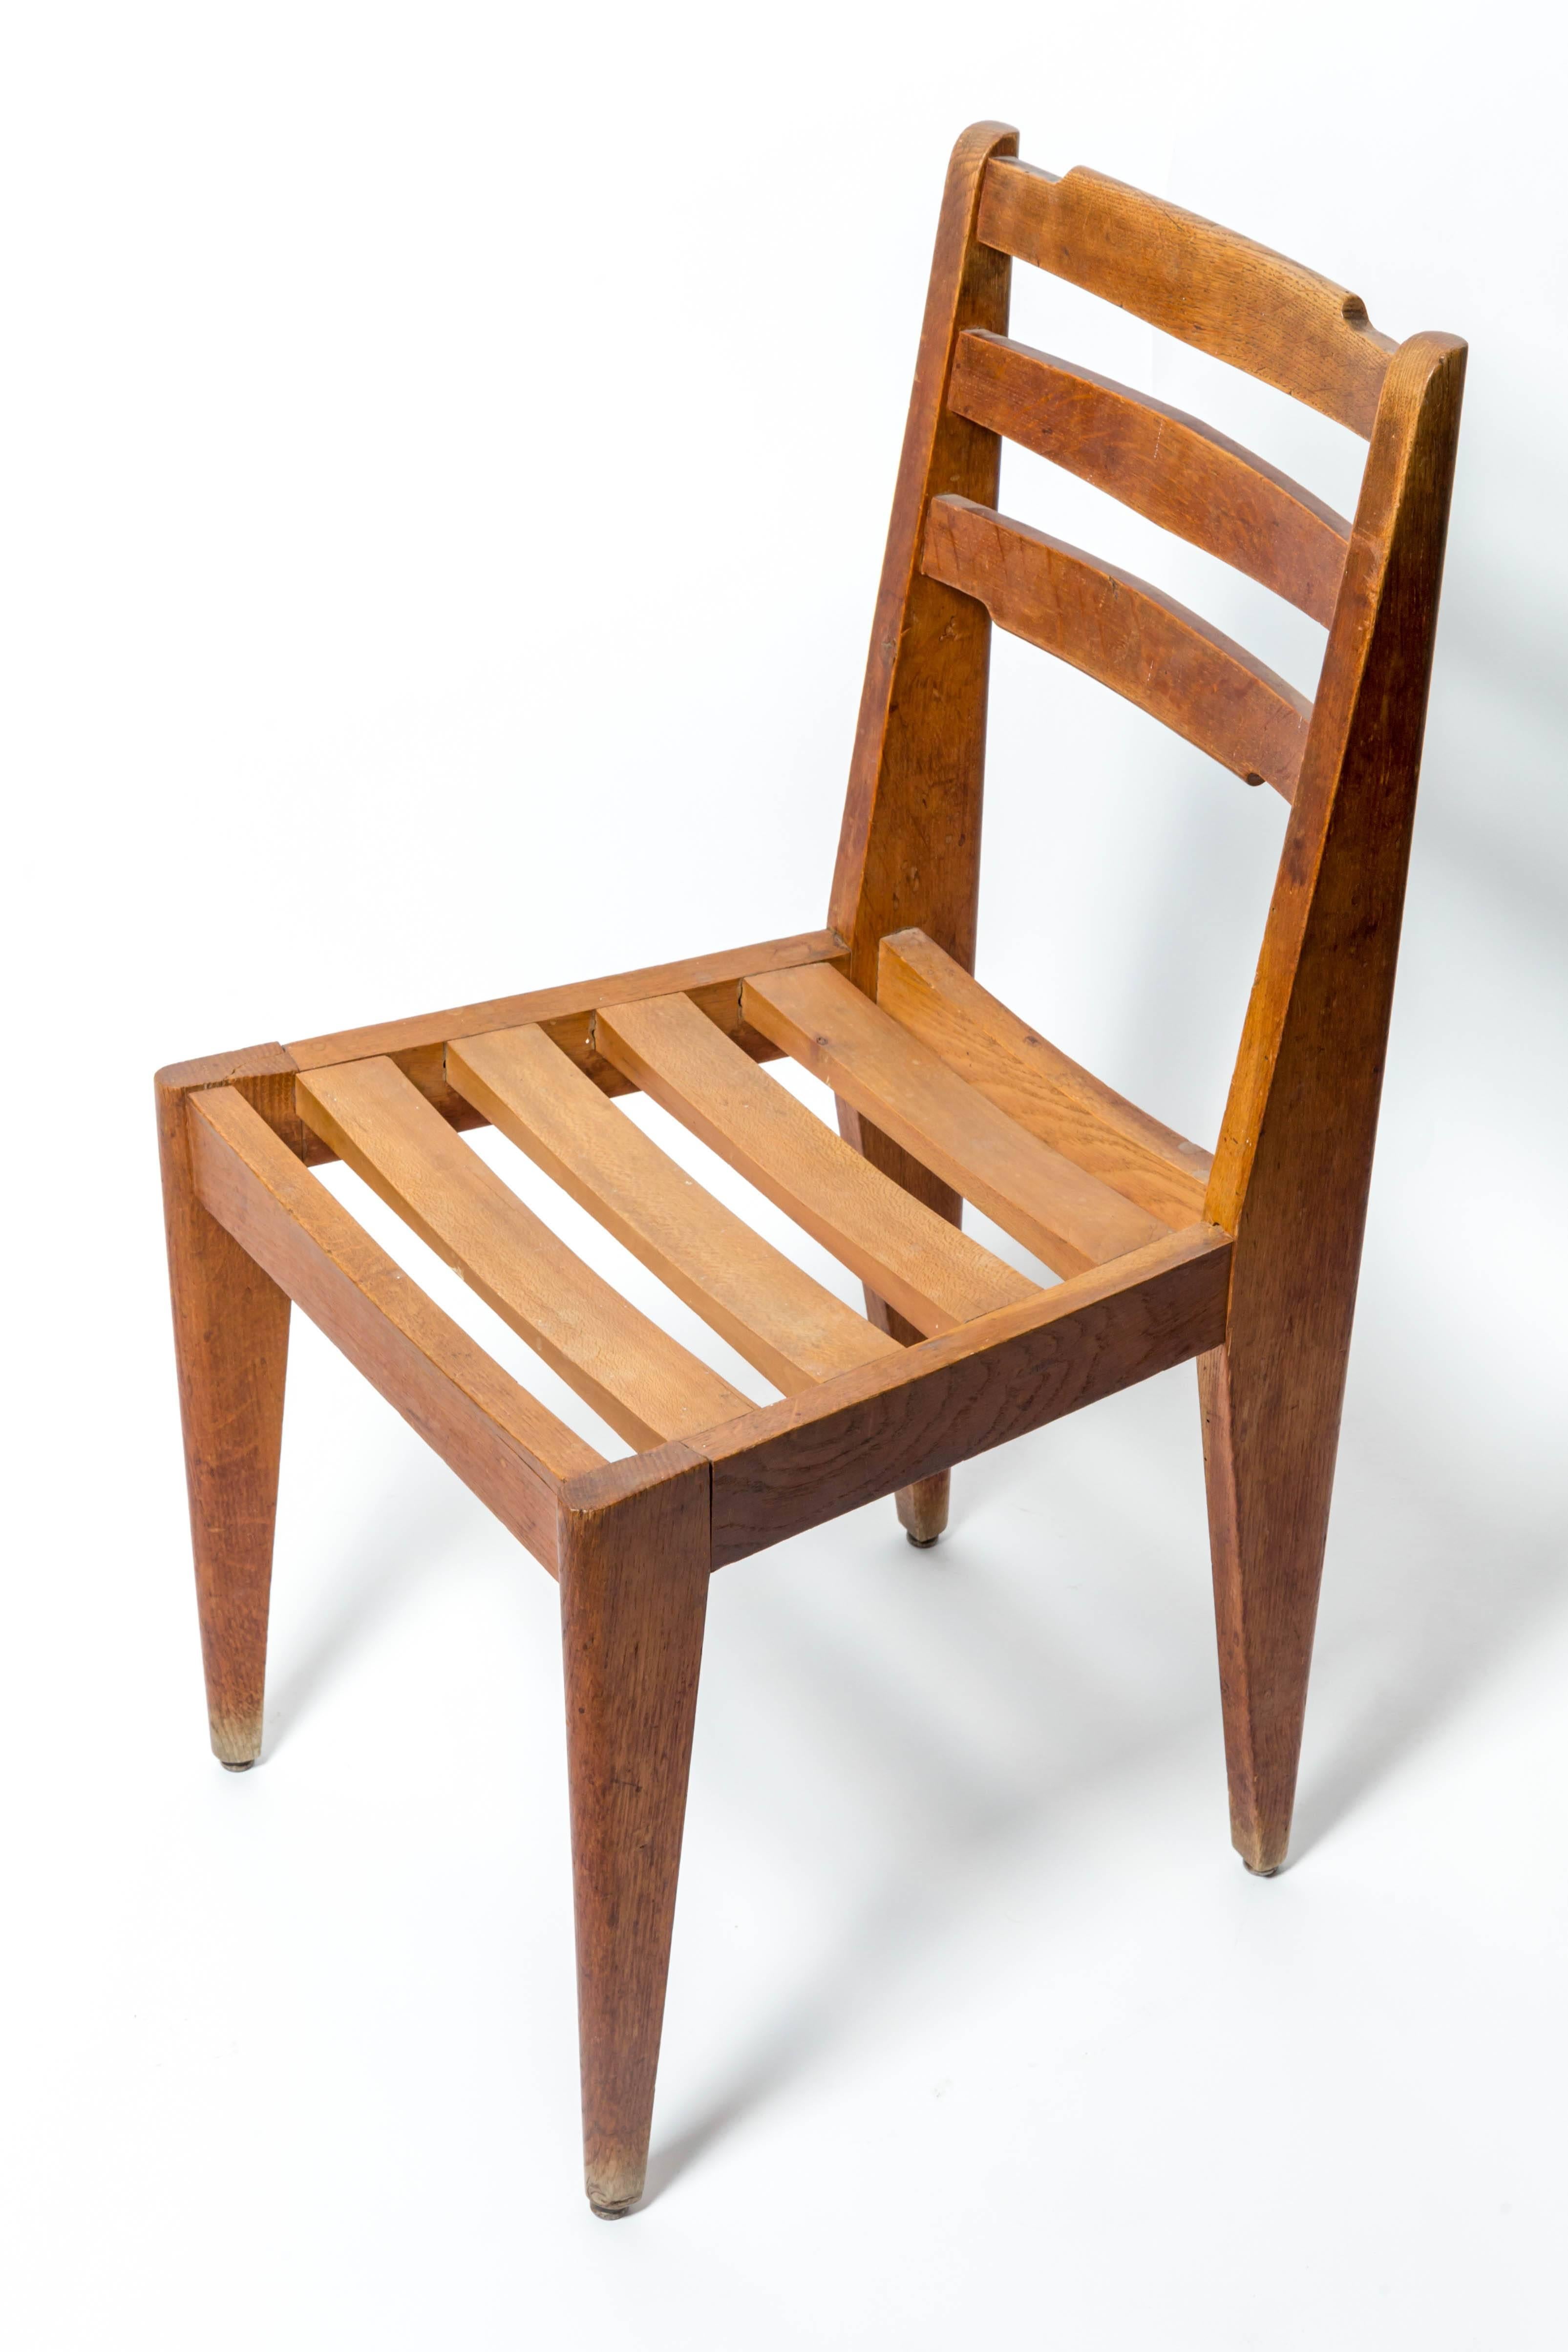 Wooden chair attributed to Gustave Gautier, France, c. 1950s. 

Handsome design consists of a solid hardwood construction, tapered legs, and slatted seat and backrest. 

The chair has been lightly refurbished to ensure structural stability while